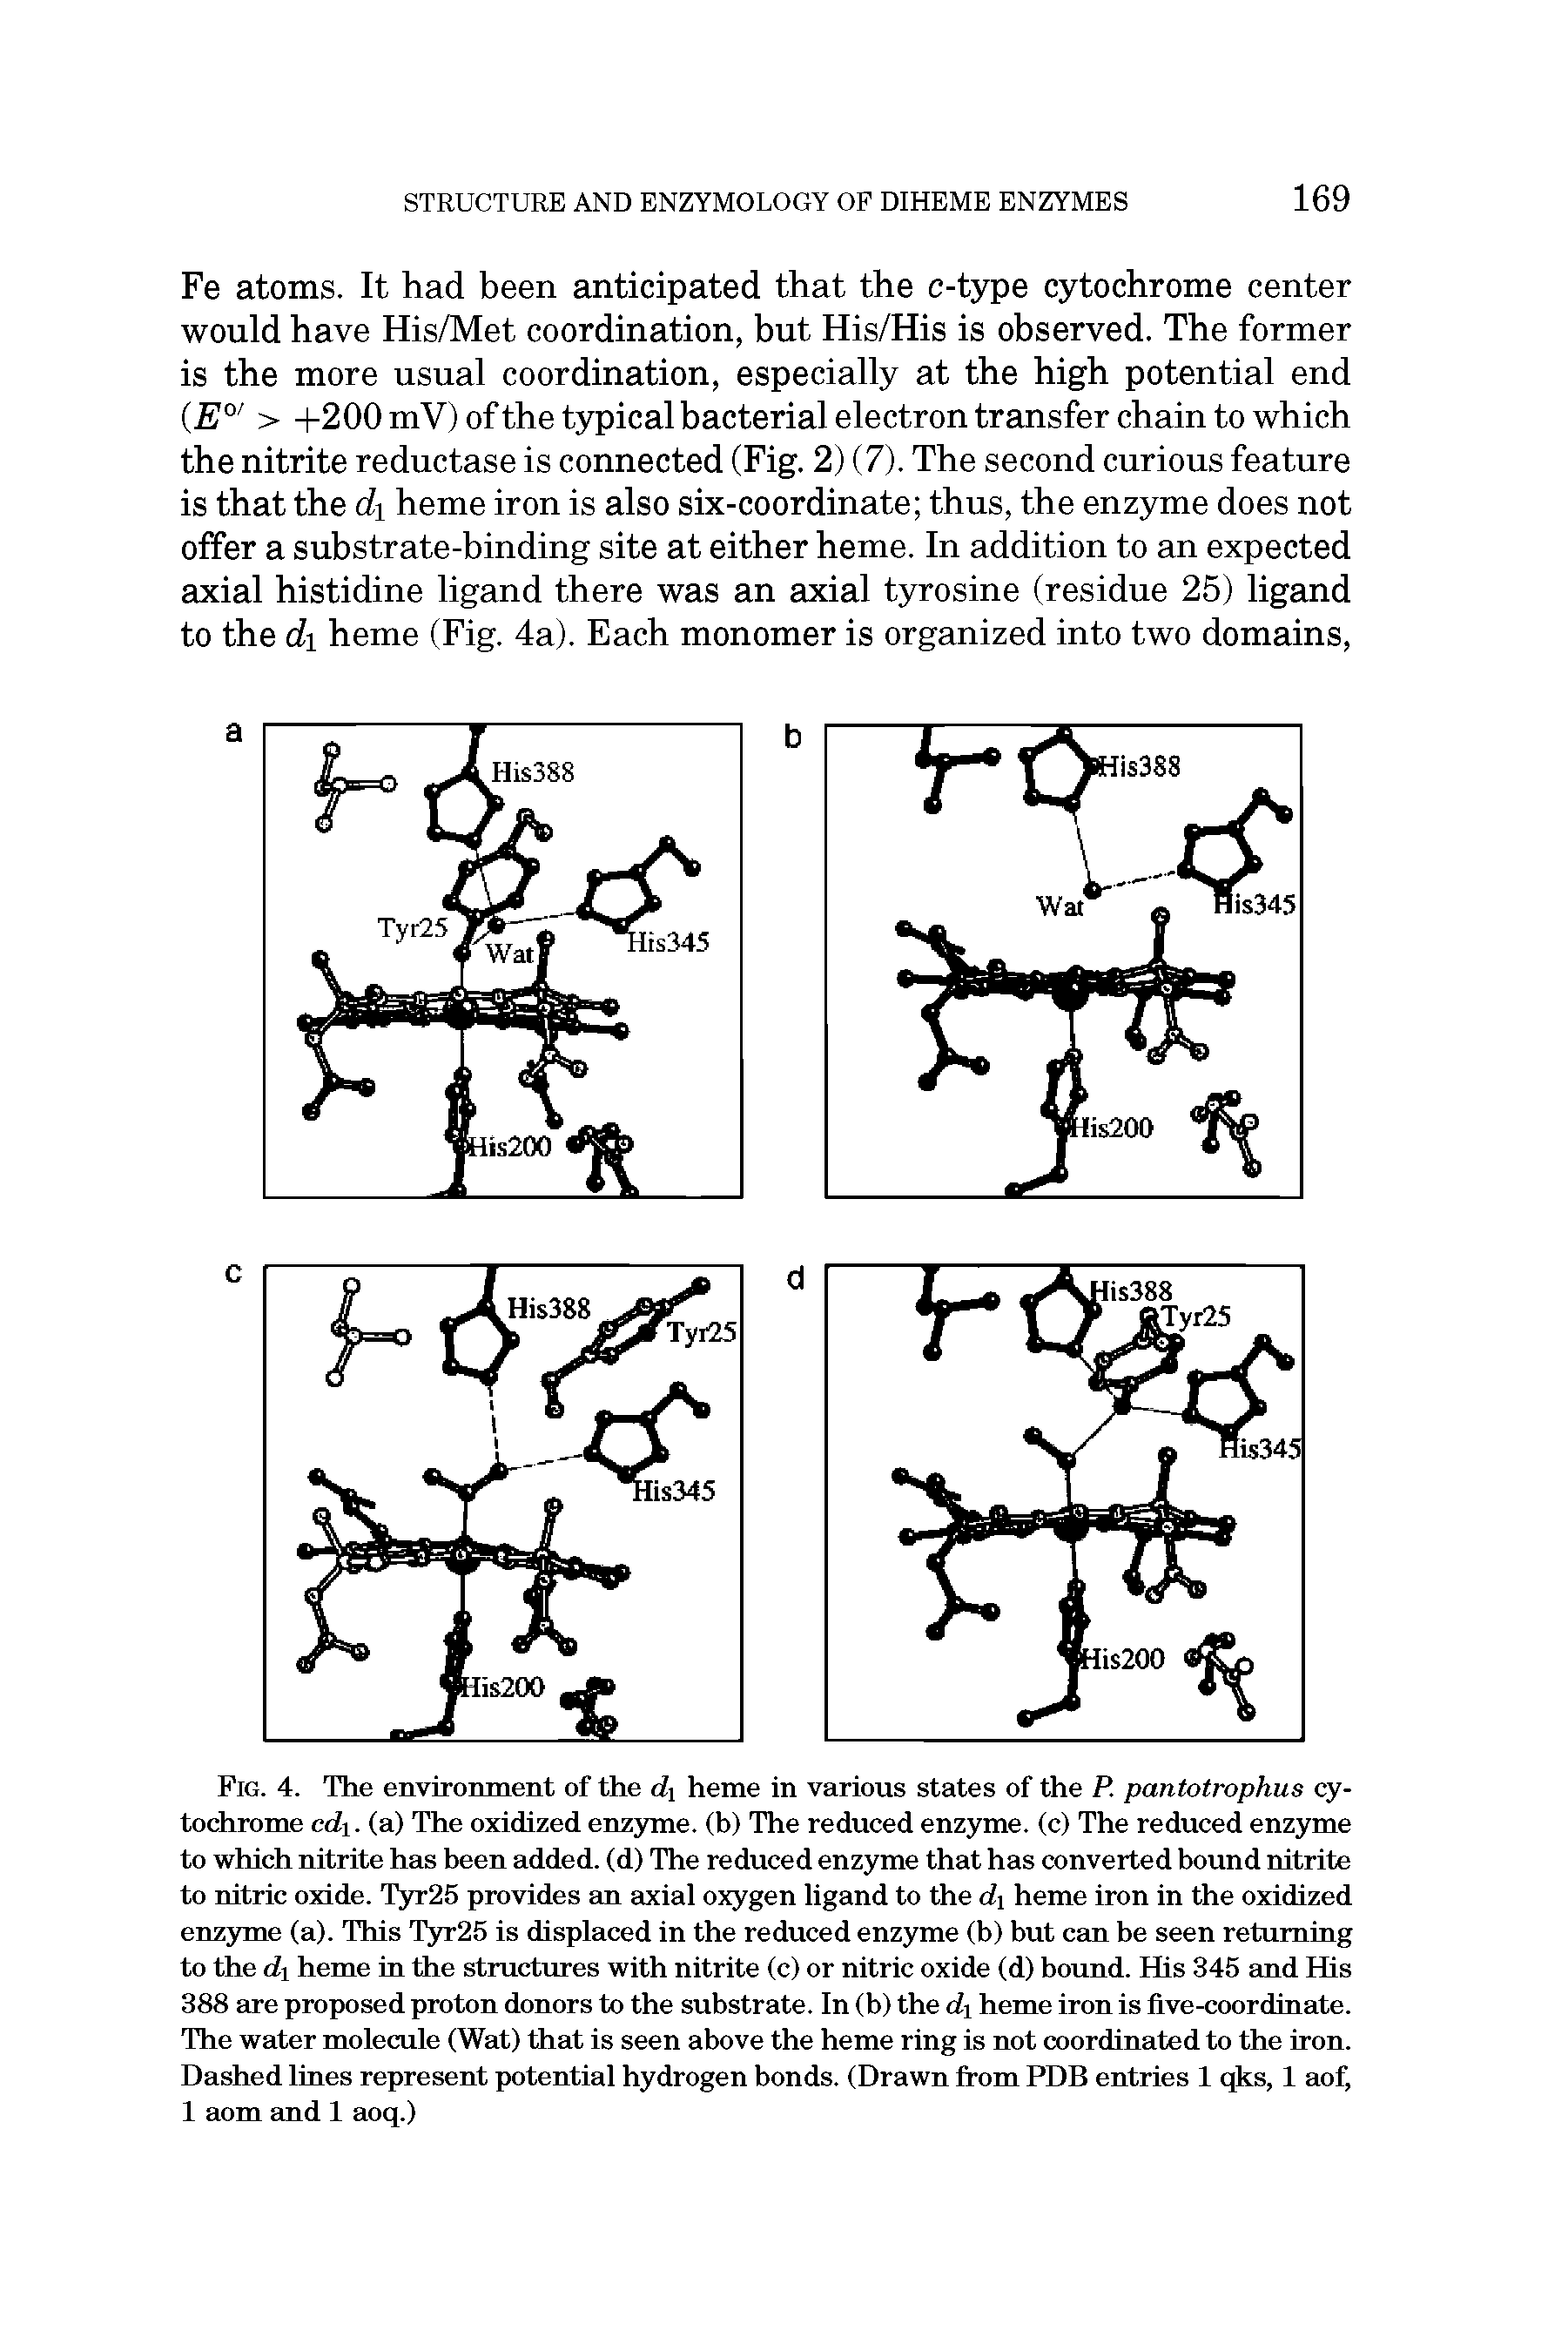 Fig. 4. The enviromnent of the di heme in various states of the P. pantotrophus cytochrome cdi. (a) The oxidized enz3rme. (b) The reduced enzyme, (c) The reduced enzyme to which nitrite has been added, (d) The reduced enzyme that has converted bound nitrite to nitric oxide. T3rr25 provides an axial oxygen ligand to the di heme iron in the oxidized enz3rme (a). This T3rr25 is displaced in the reduced enzyme (b) but can be seen returning to the di heme in the structures with nitrite (c) or nitric oxide (d) bound. His 345 and His 388 are proposed proton donors to the substrate. In (b) the di heme iron is five-coordinate. The water molecule (Wat) that is seen above the heme ring is not coordinated to the iron. Dashed lines represent potential hydrogen bonds. (Drawn from PDB entries 1 qks, 1 aof, 1 aom and 1 aoq.)...